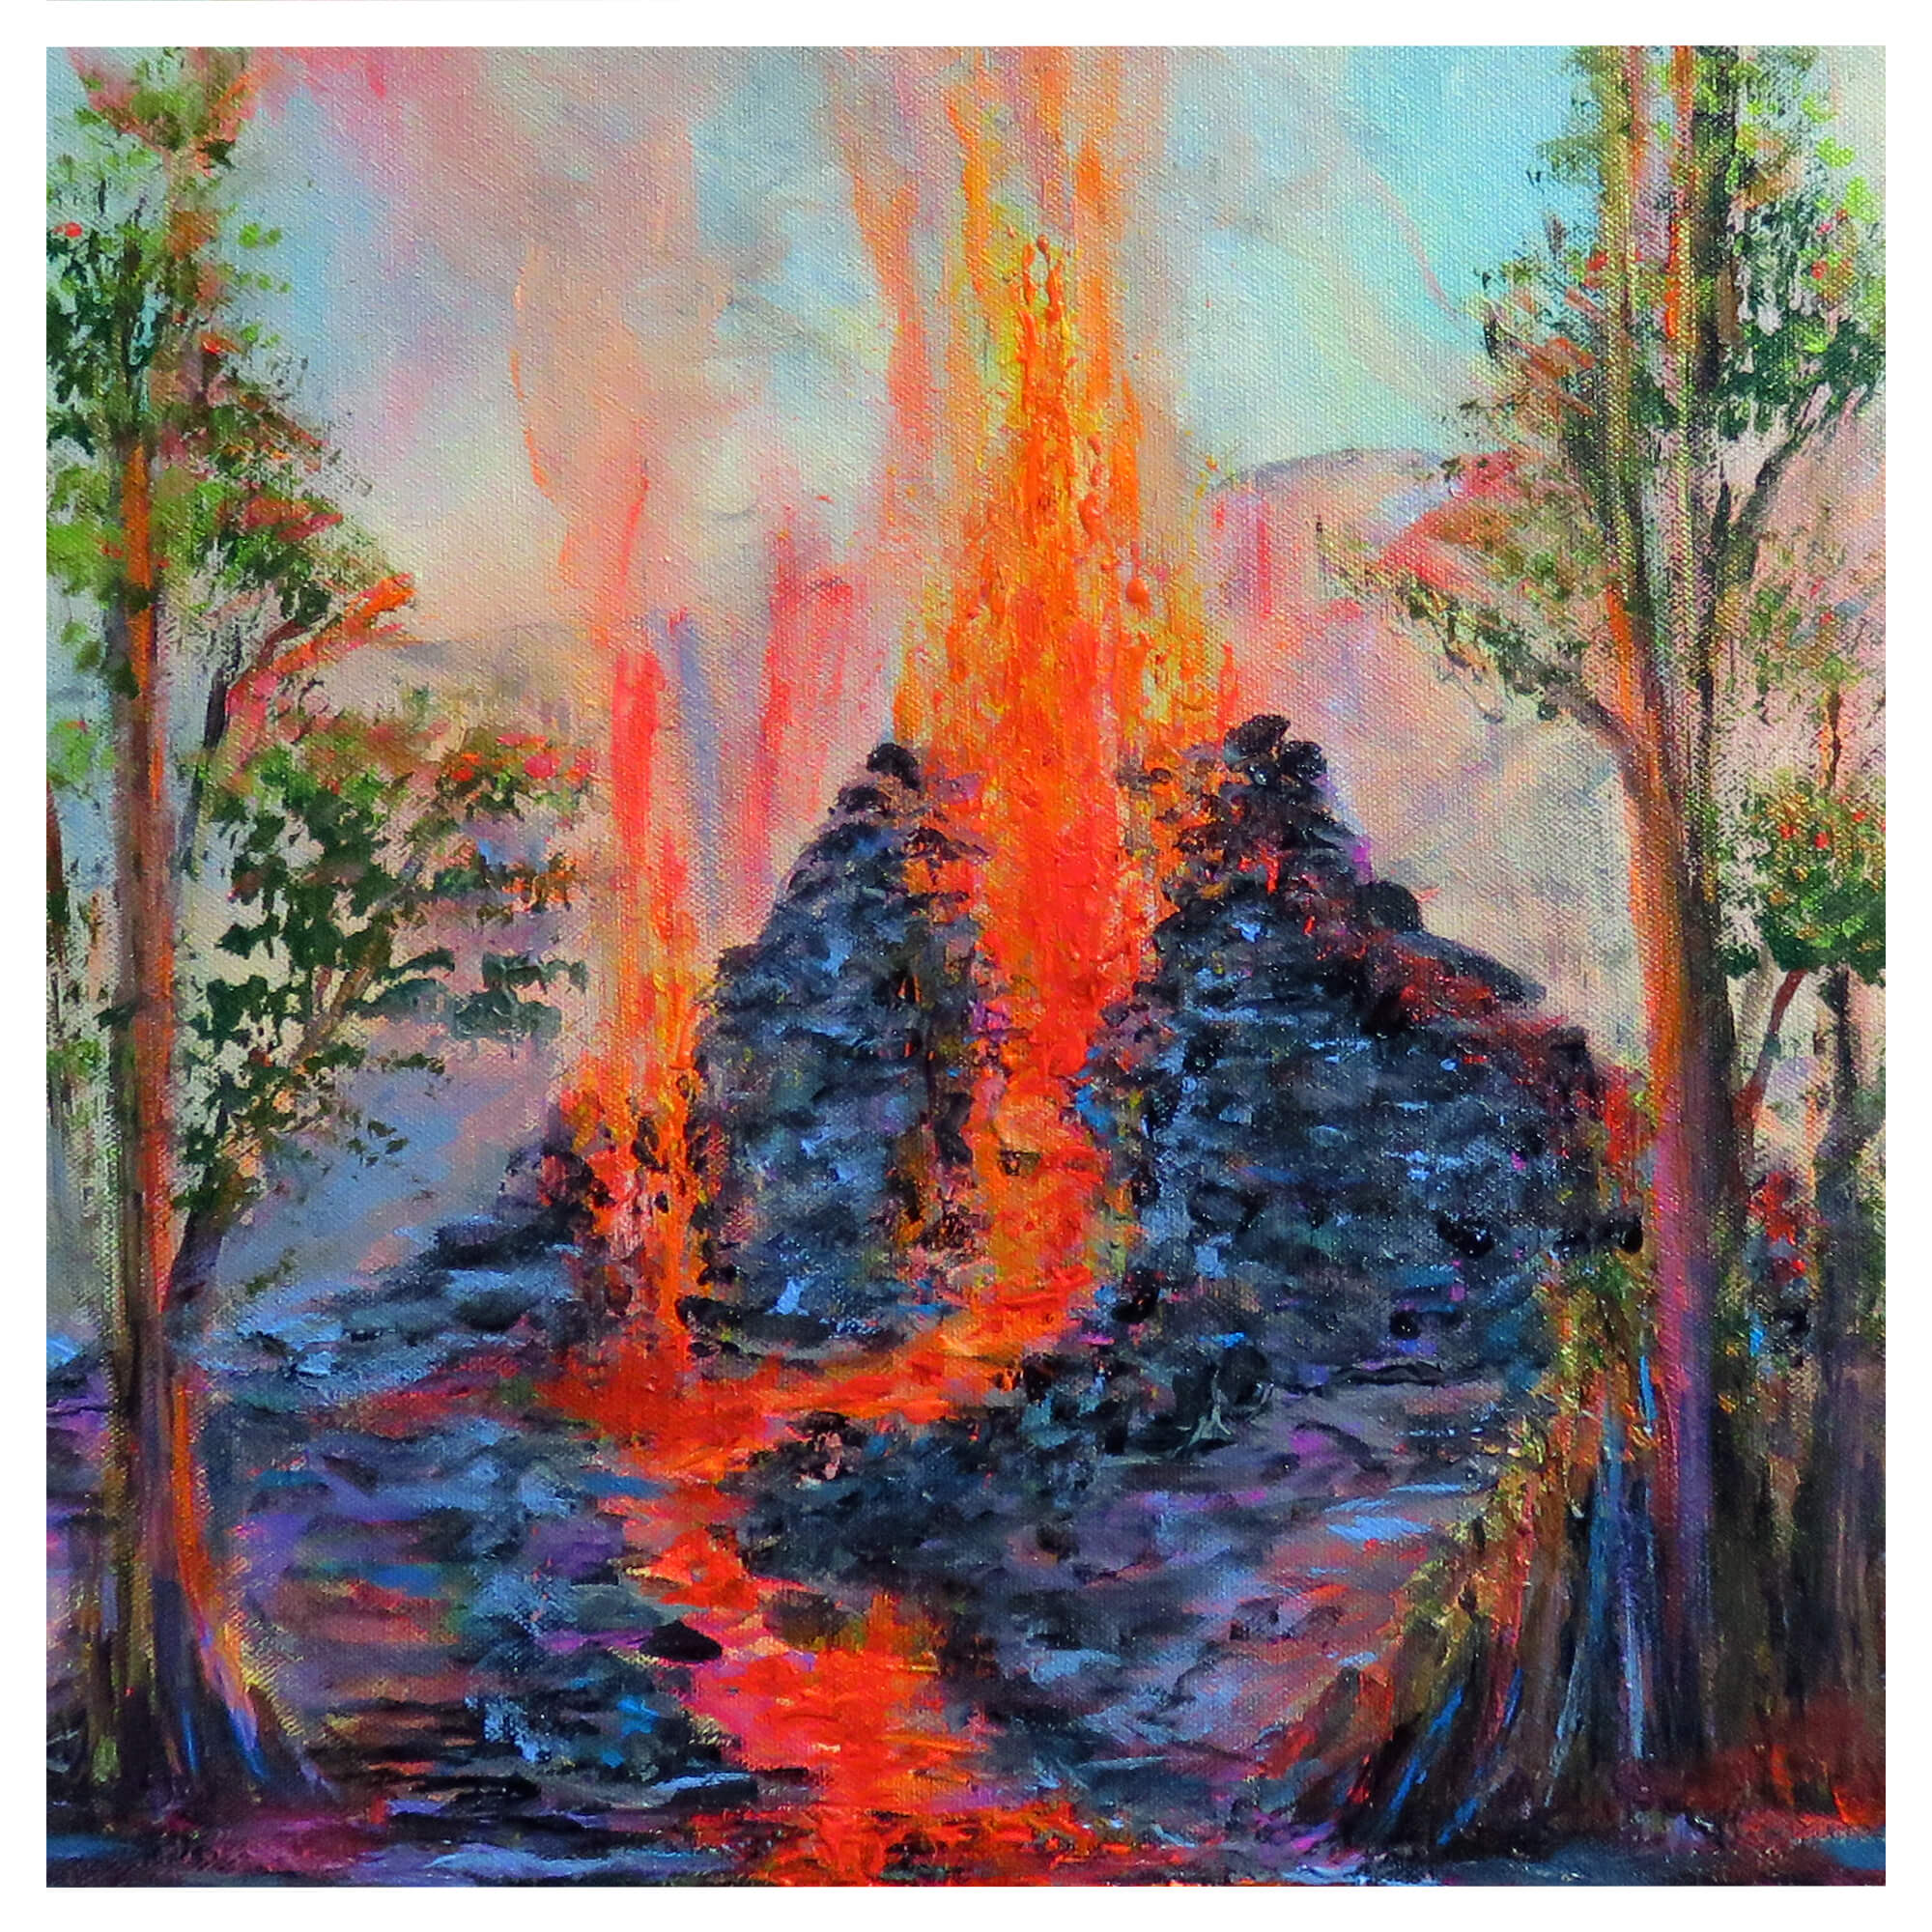 Exploding lava over a cinder cone by Hawaii artist Jess Burda